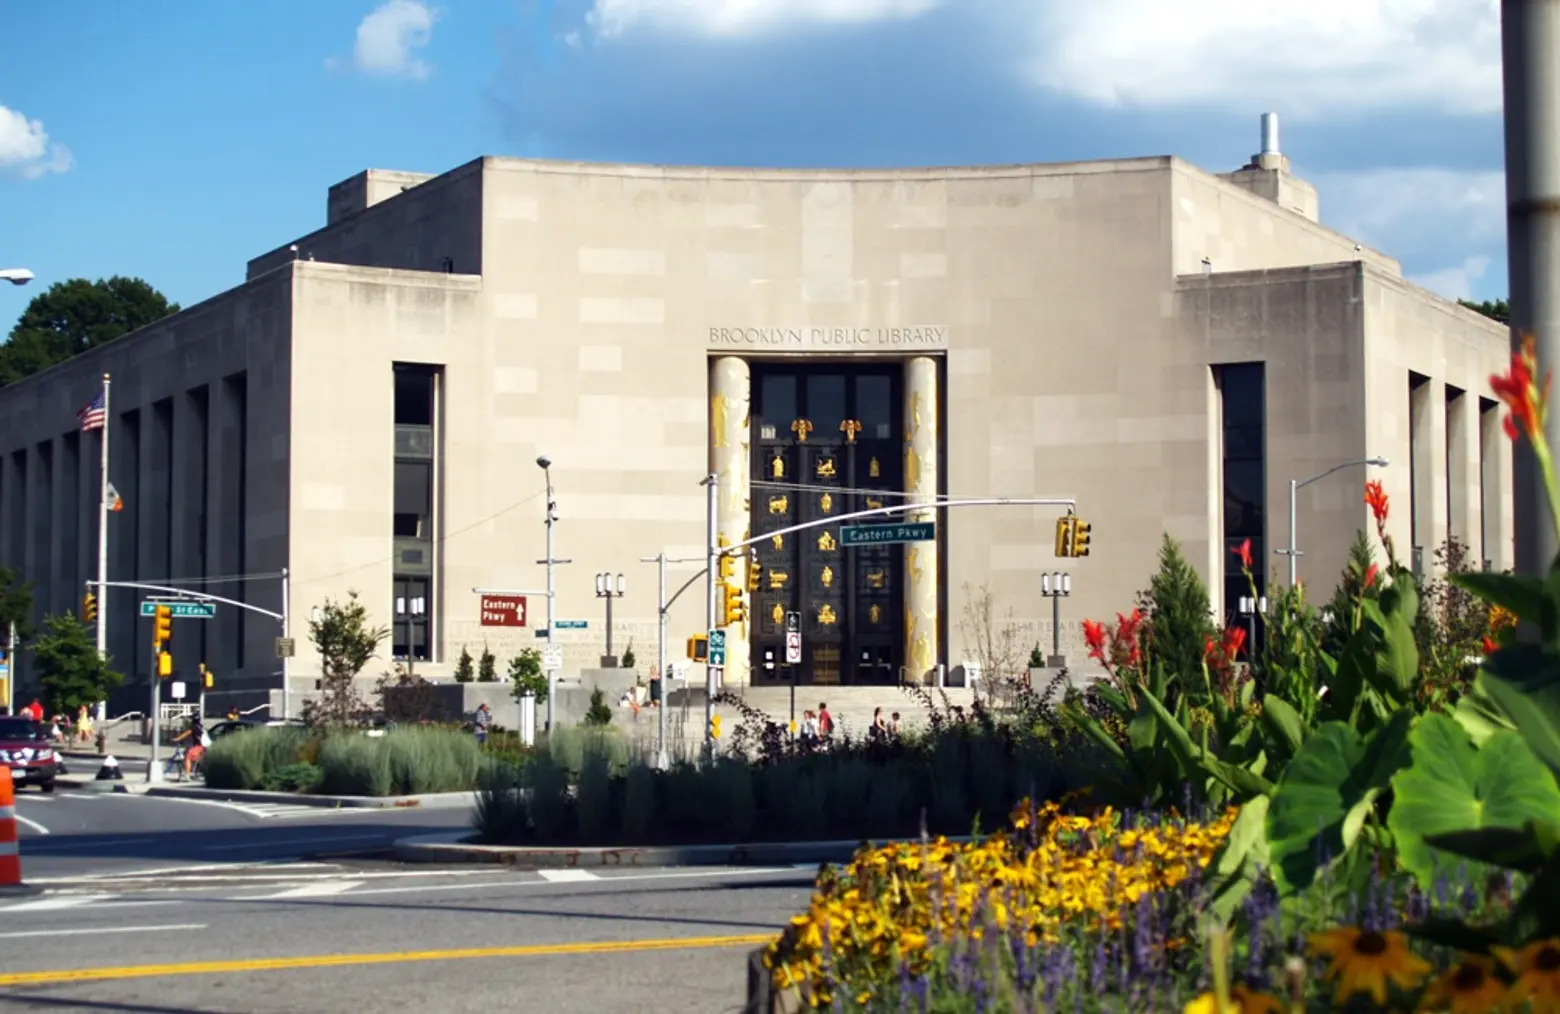 Brooklyn Public Library receives $3M grant for tech gadgets for free public use